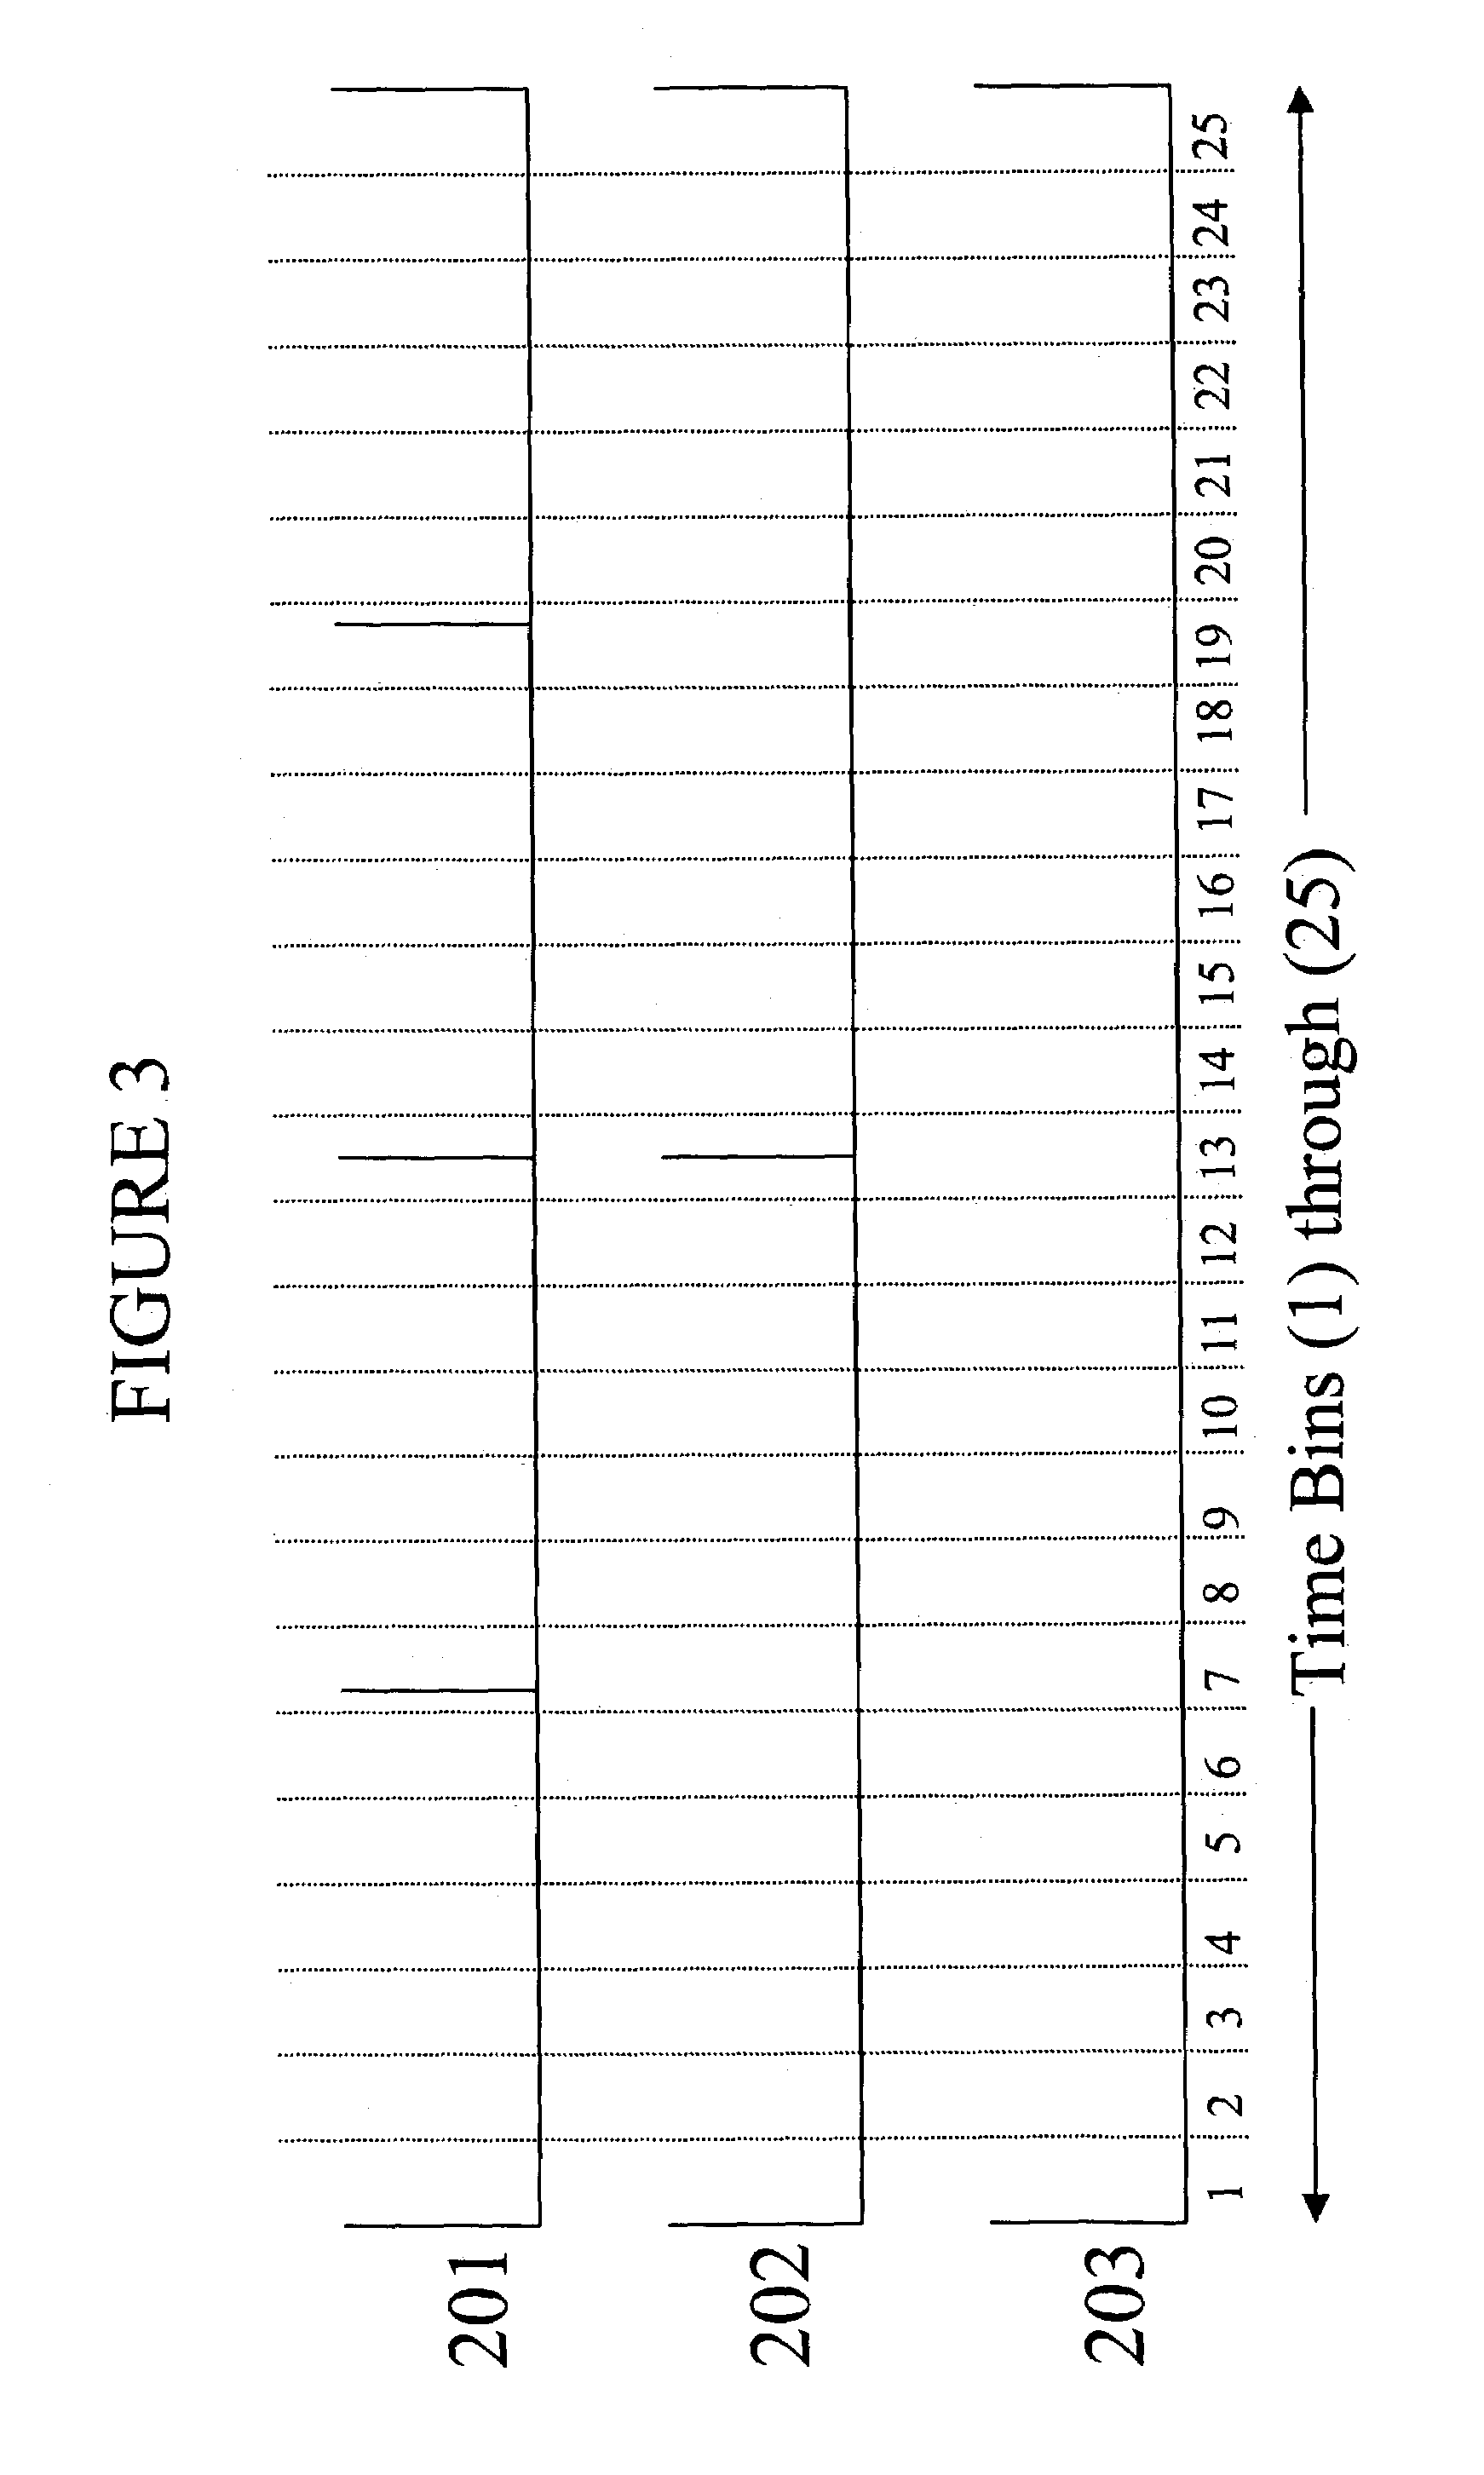 Ultra-wideband pulse modulation system and method